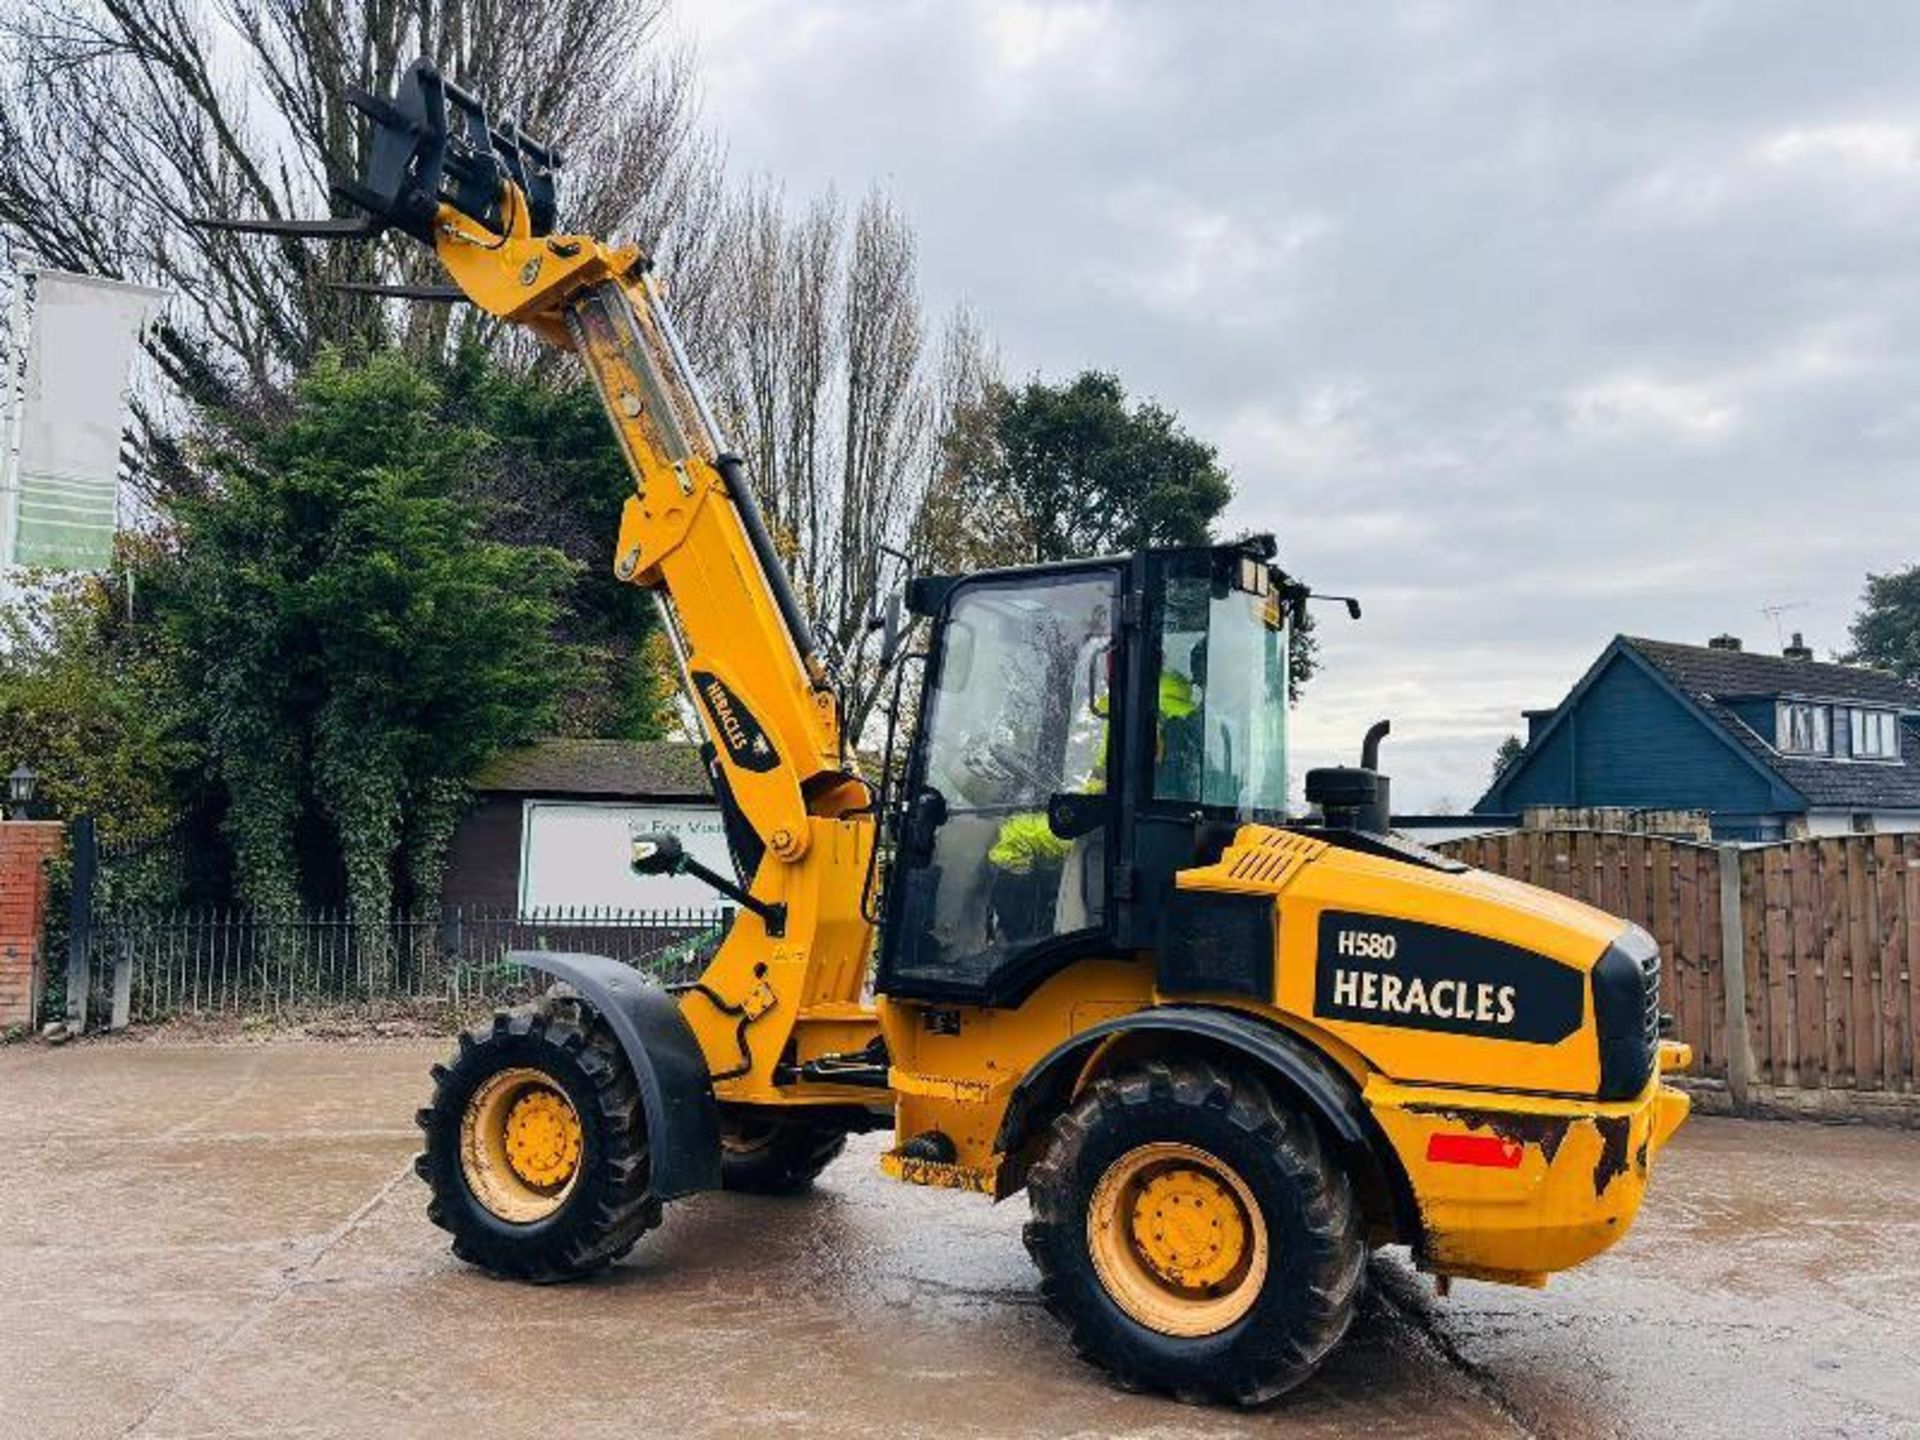 HERACLES H580 4WD TELEHANDLER *YEAR 2019, 1514 HOURS* C/W QUICK HITCH & PALLET TINES - Image 5 of 16